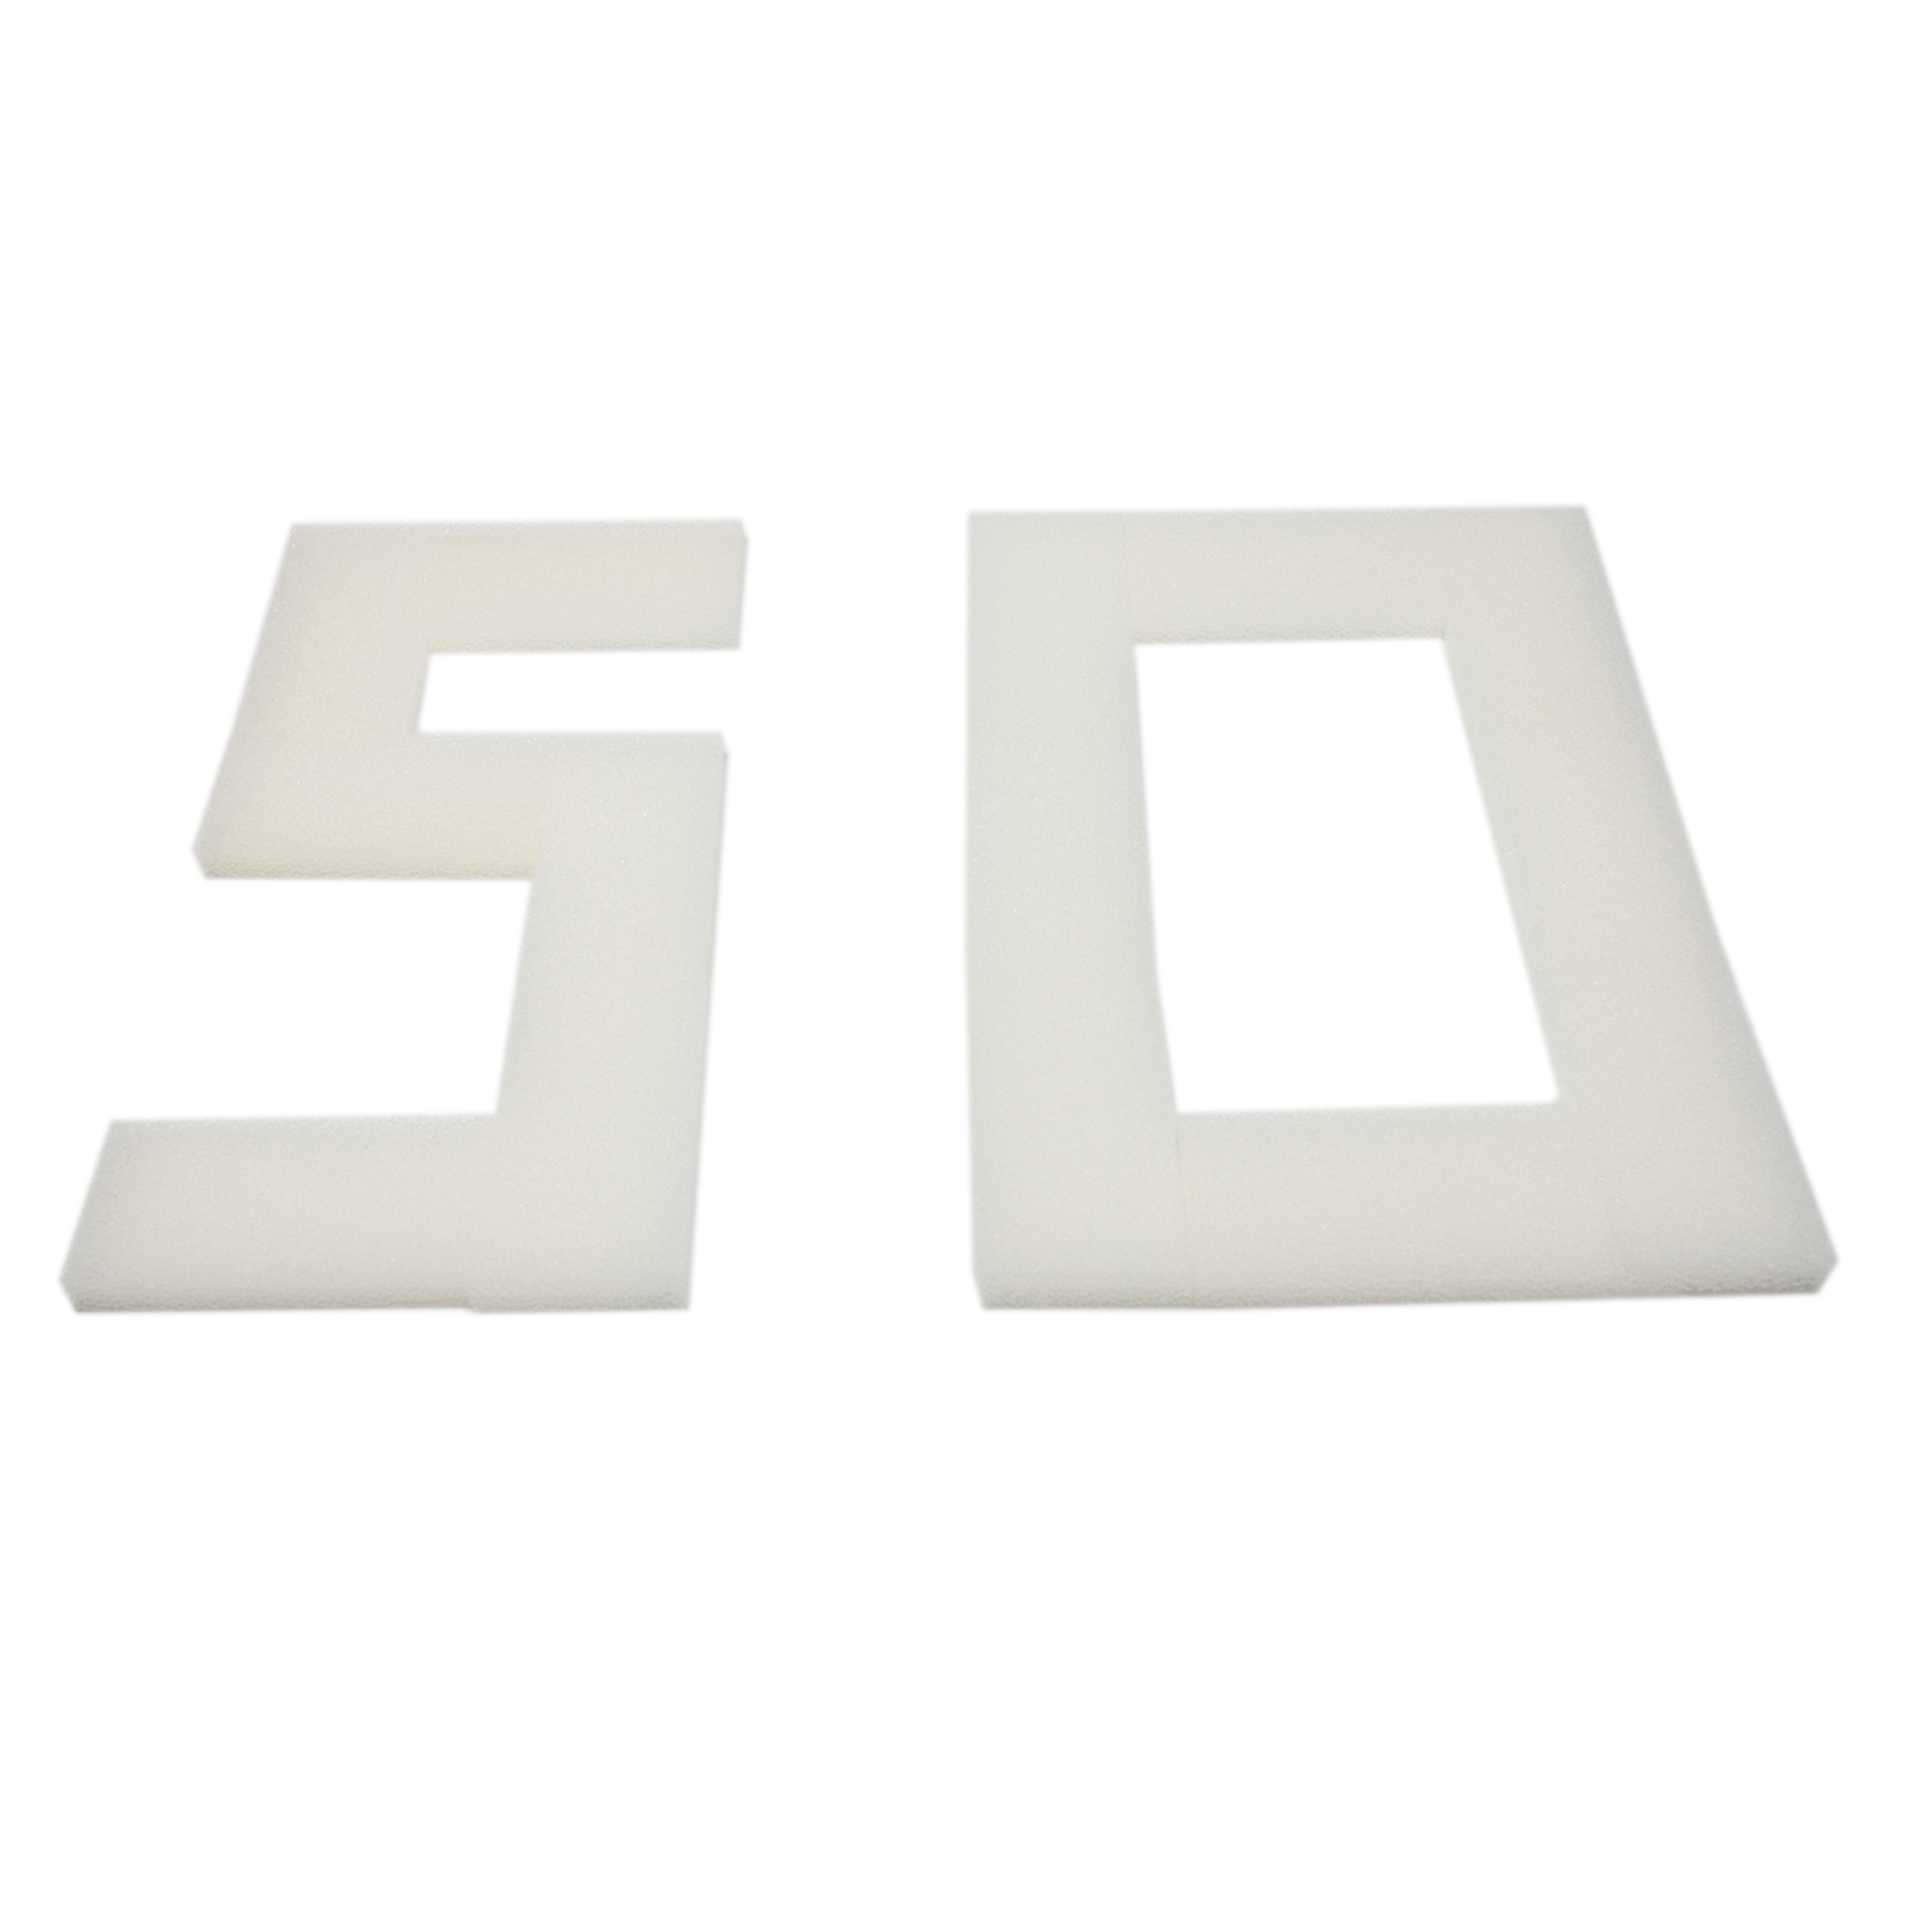 LTWHOME Compatible Foam Filters Suitable for Interpet Pf3 Internal Filter(Pack of 50)